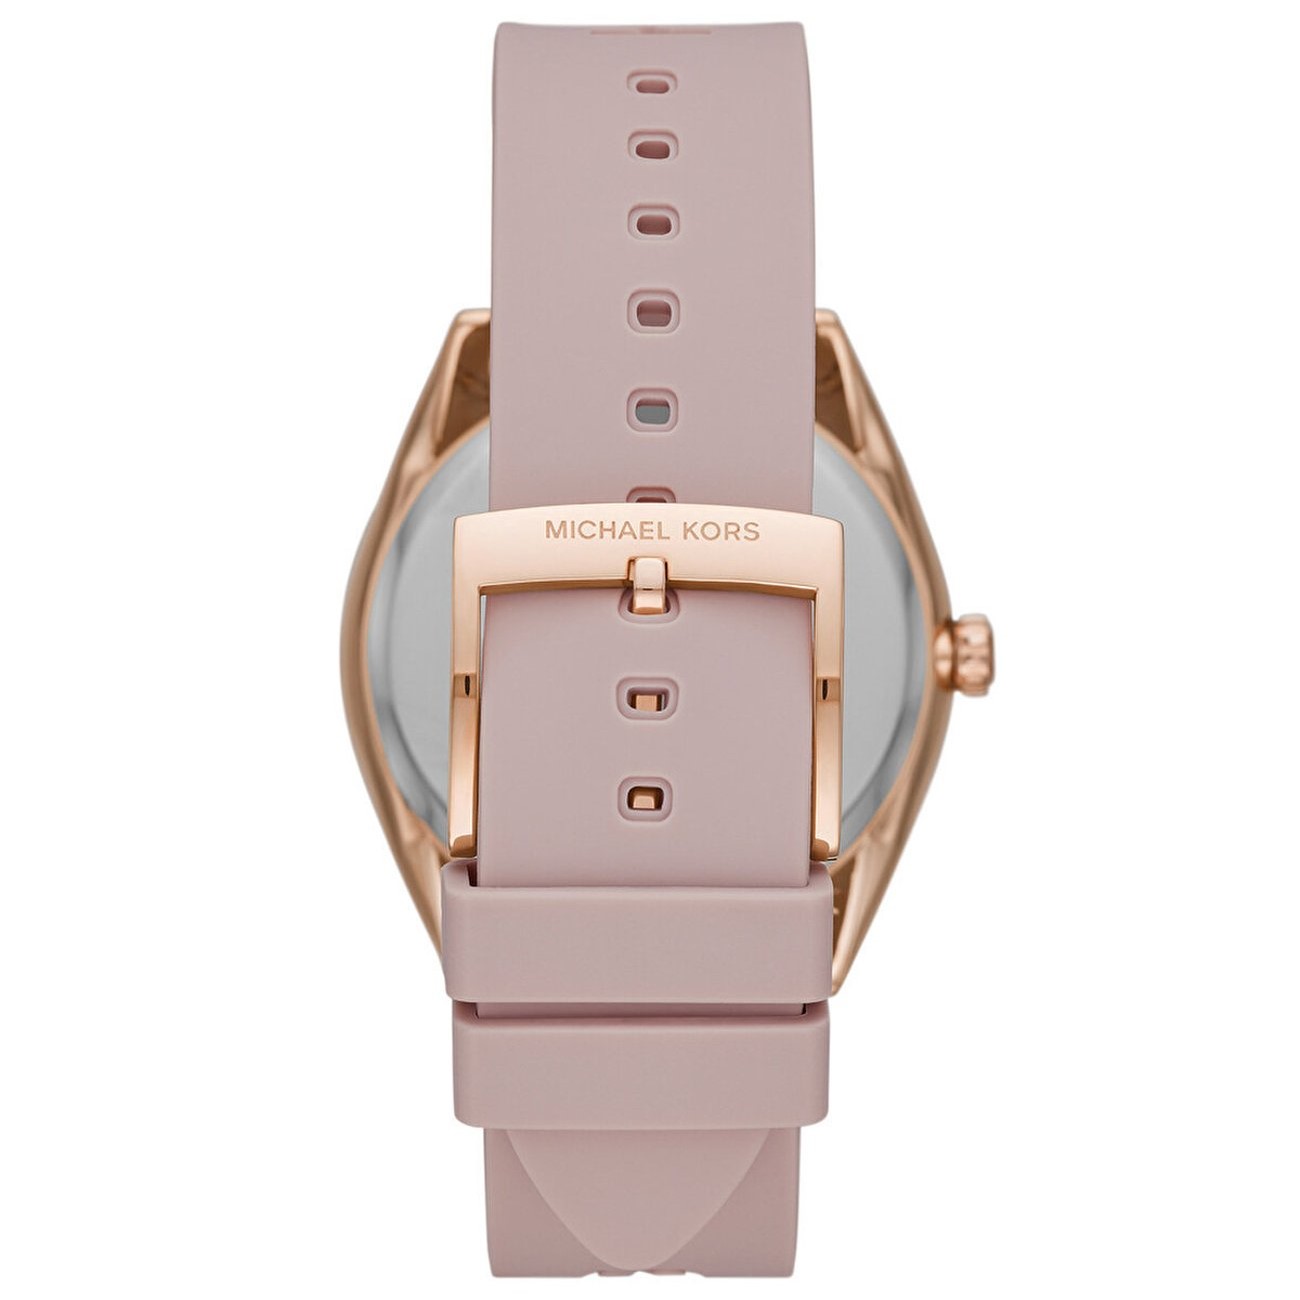 ĐỒNG HỒ NỮ MICHAEL KORS RUNWAY JANELLE ROSE GOLD PINK SILICONE WATCH MK7139 7